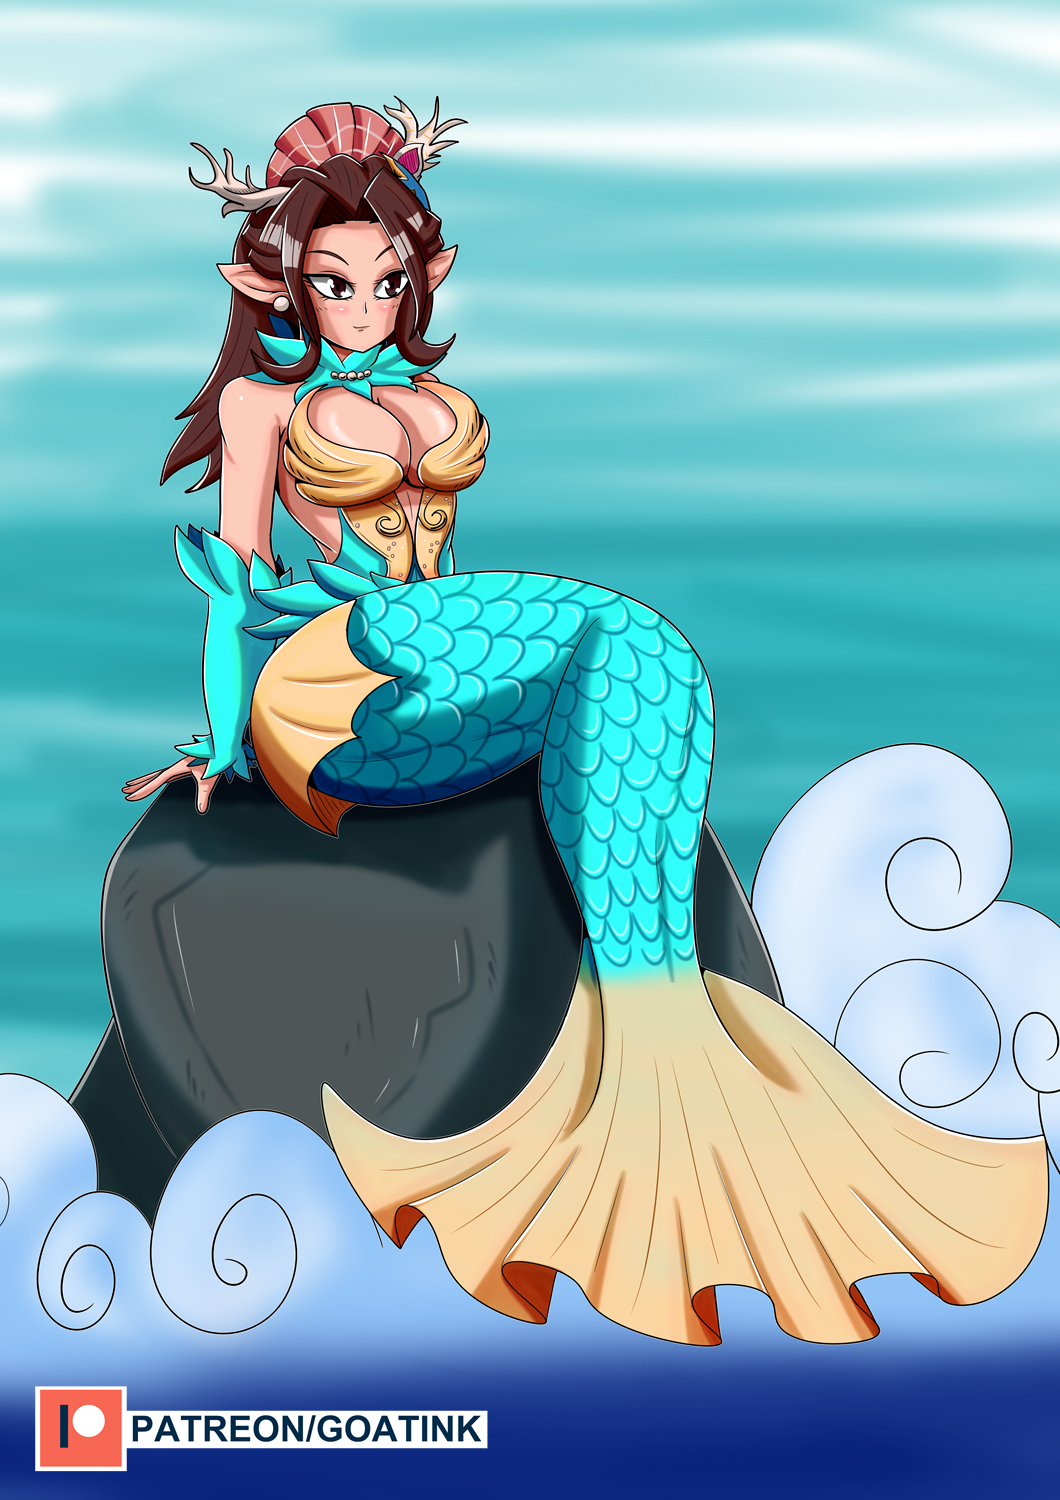 Mermaid Ying by @skyrimDOS on Twitter! : r/Paladins